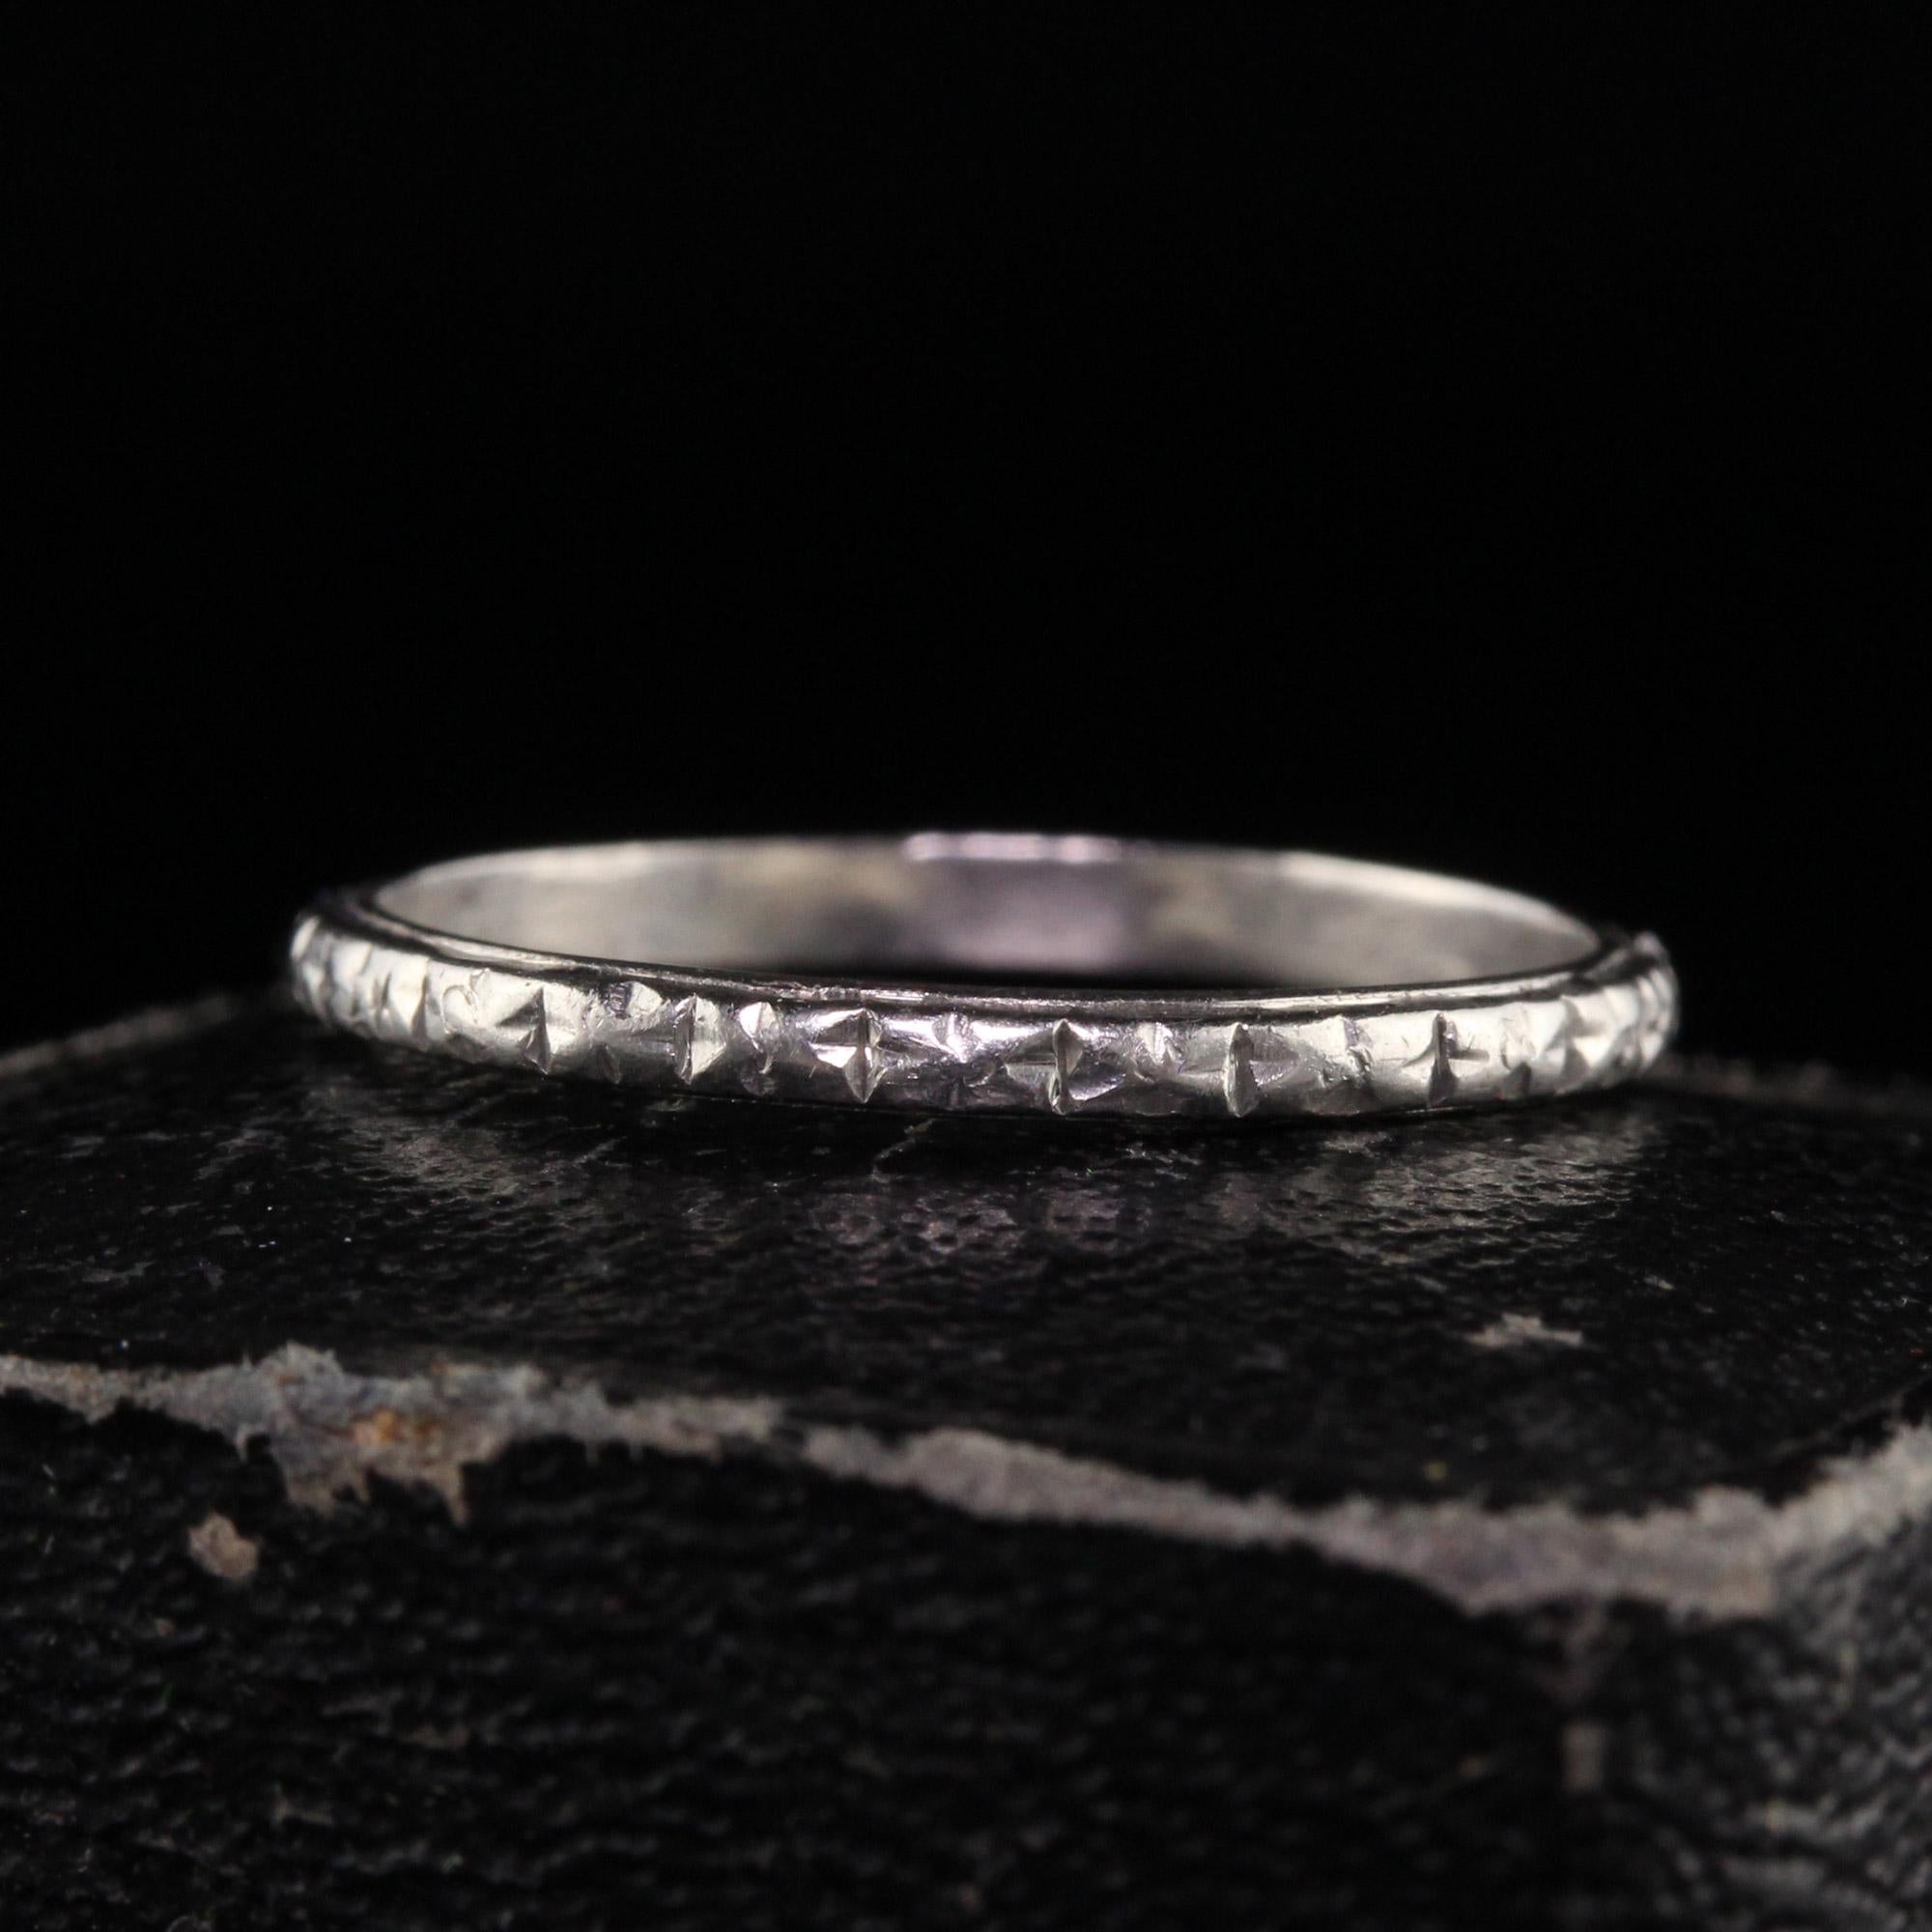 Beautiful Antique Art Deco Platinum Engraved Wedding Band - Size 5. This beautiful wedding band is crafted in platinum. The ring has deep engravings going around the entire ring and is in good condition. This ring can be worn by itself or even